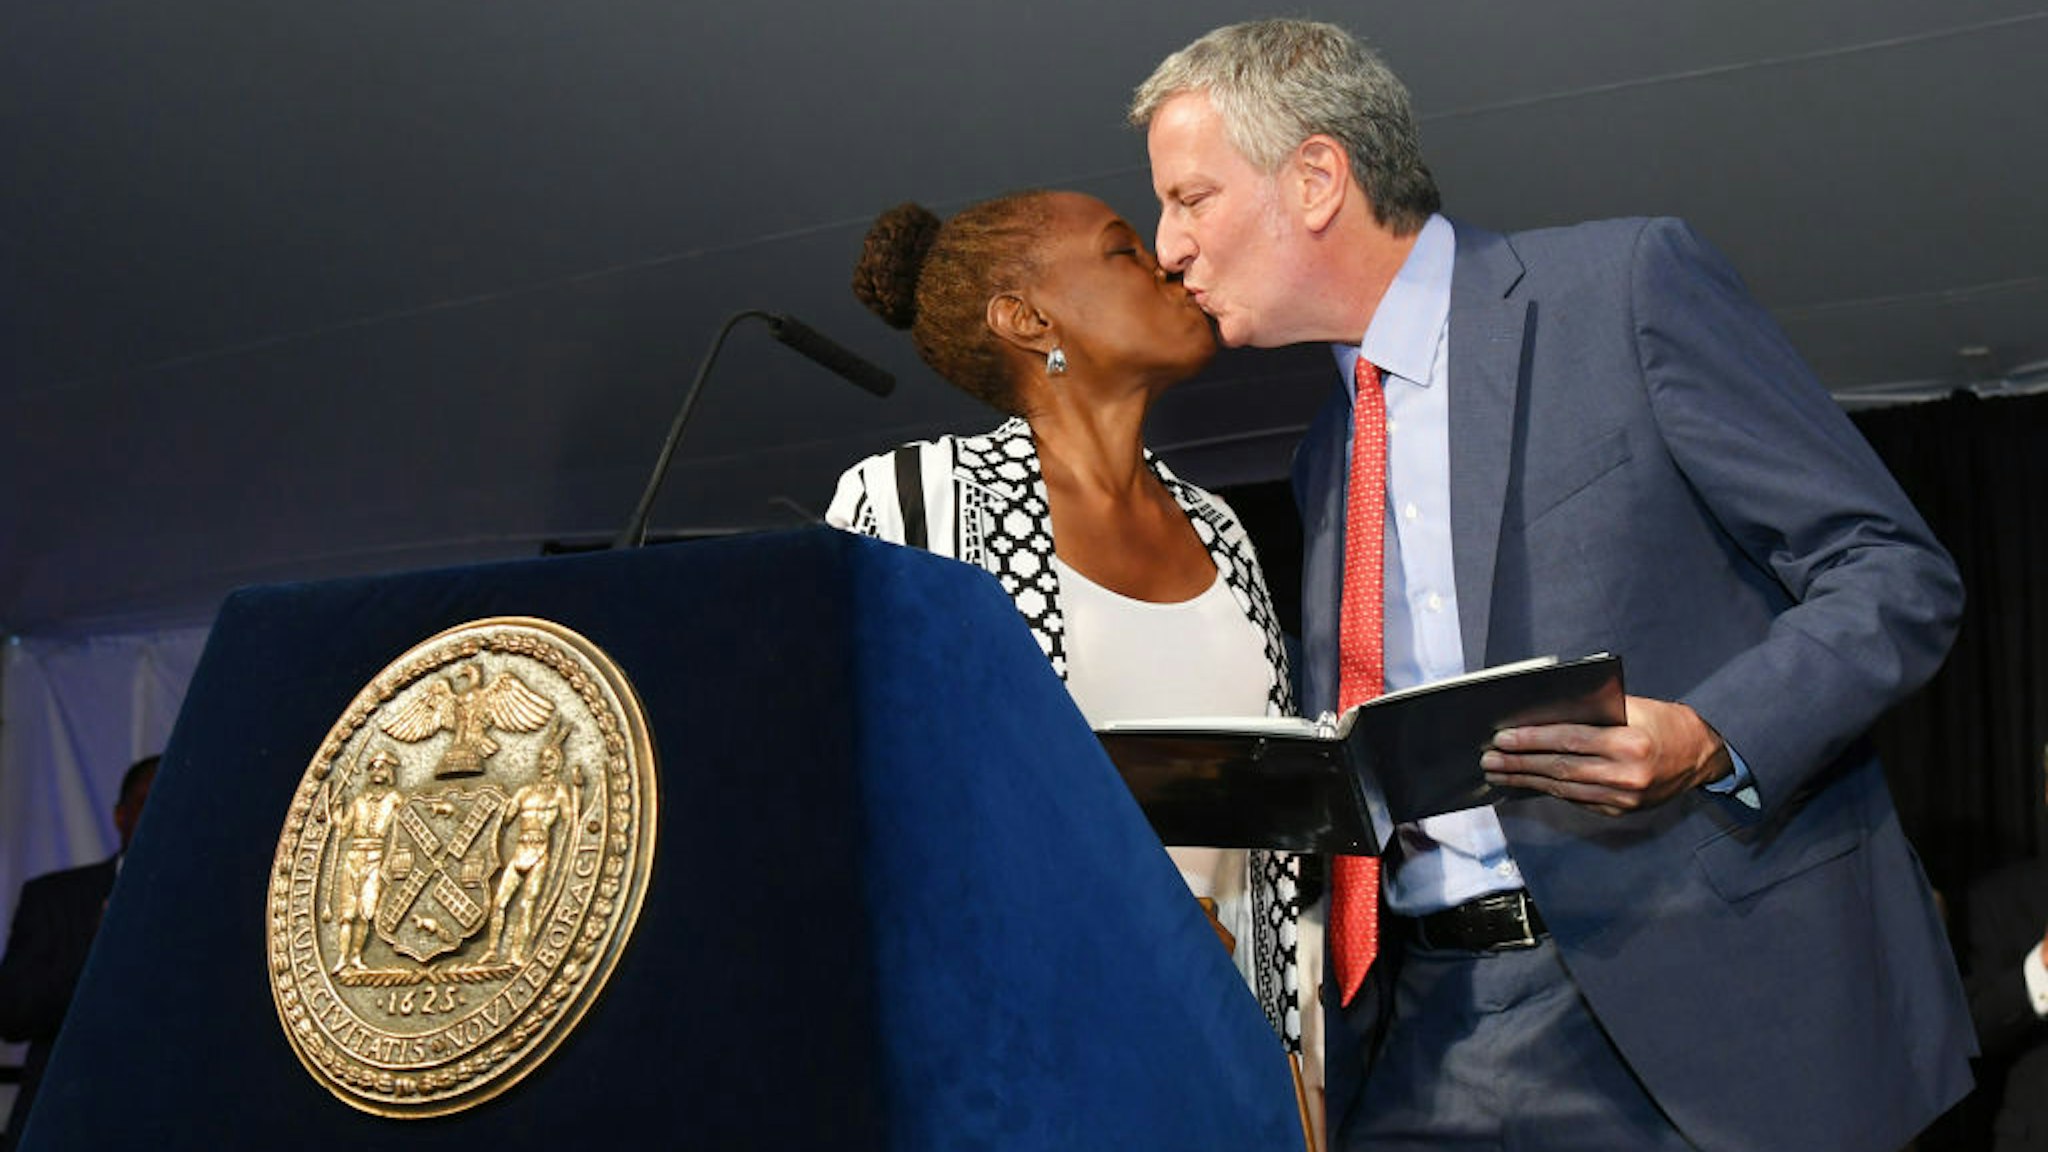 Chirlane McCray and NYC mayor Bill de Blasio appear onstage as Harlem, New York City And New York State honor Memphis' 200th Anniversary celebrating "A New Century Of Soul" between two iconic communities at Gracie Mansion on July 18, 2019 in New York City.